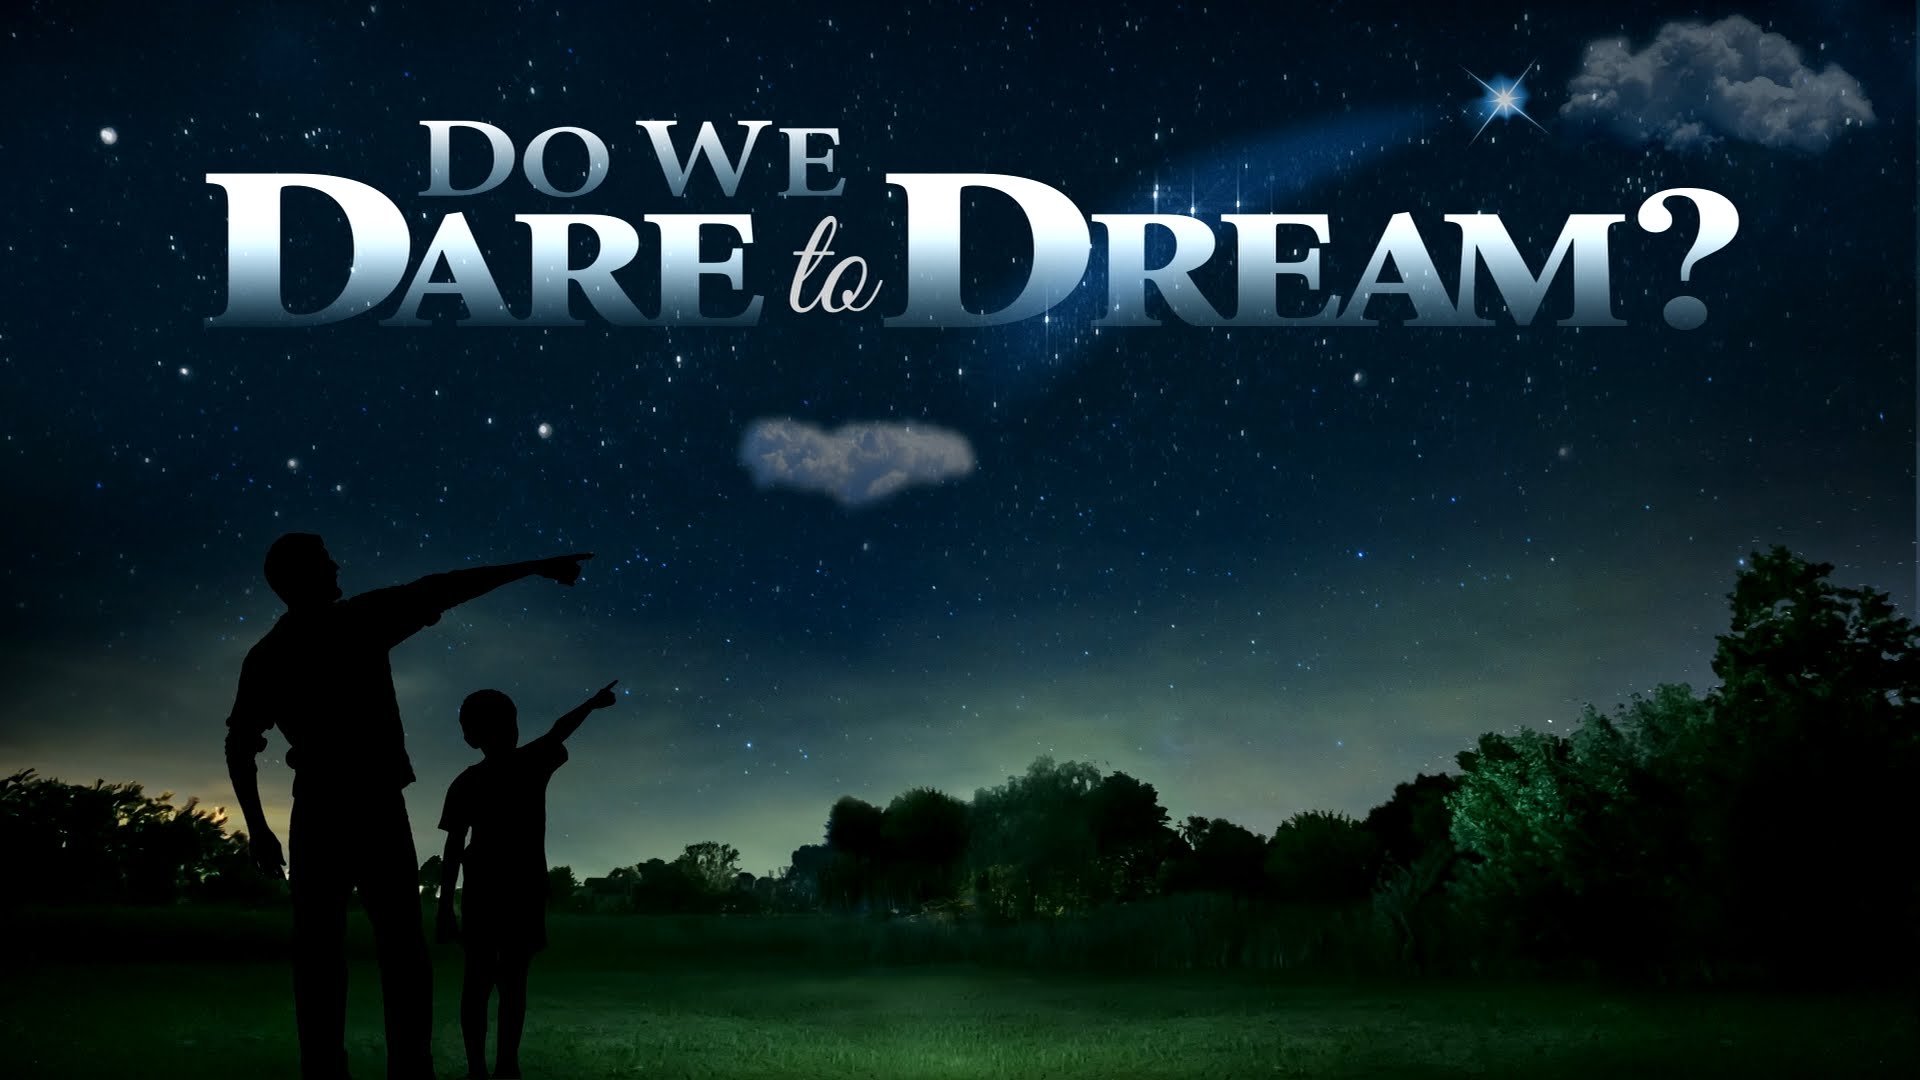 Dare To Dream Wallpaper Free Hd,, Images, The Word - Do We Dare To Dream - HD Wallpaper 